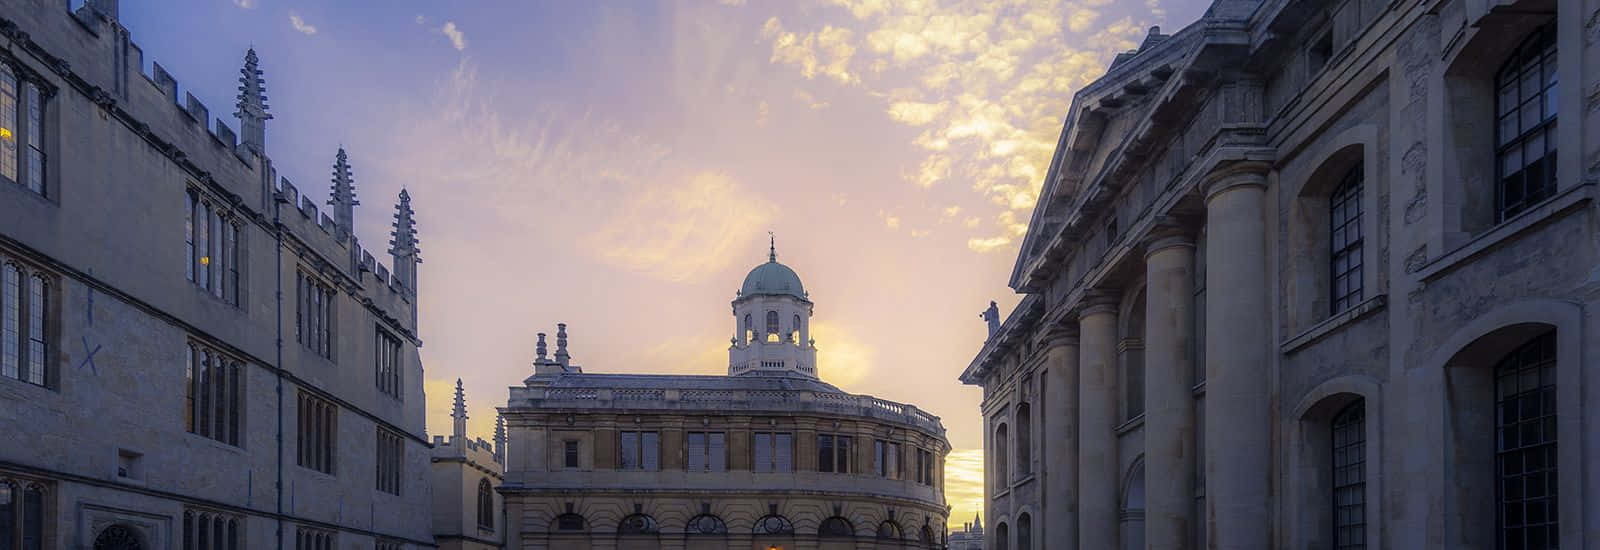 Oxford Sunset Architecture Panorama Wallpaper